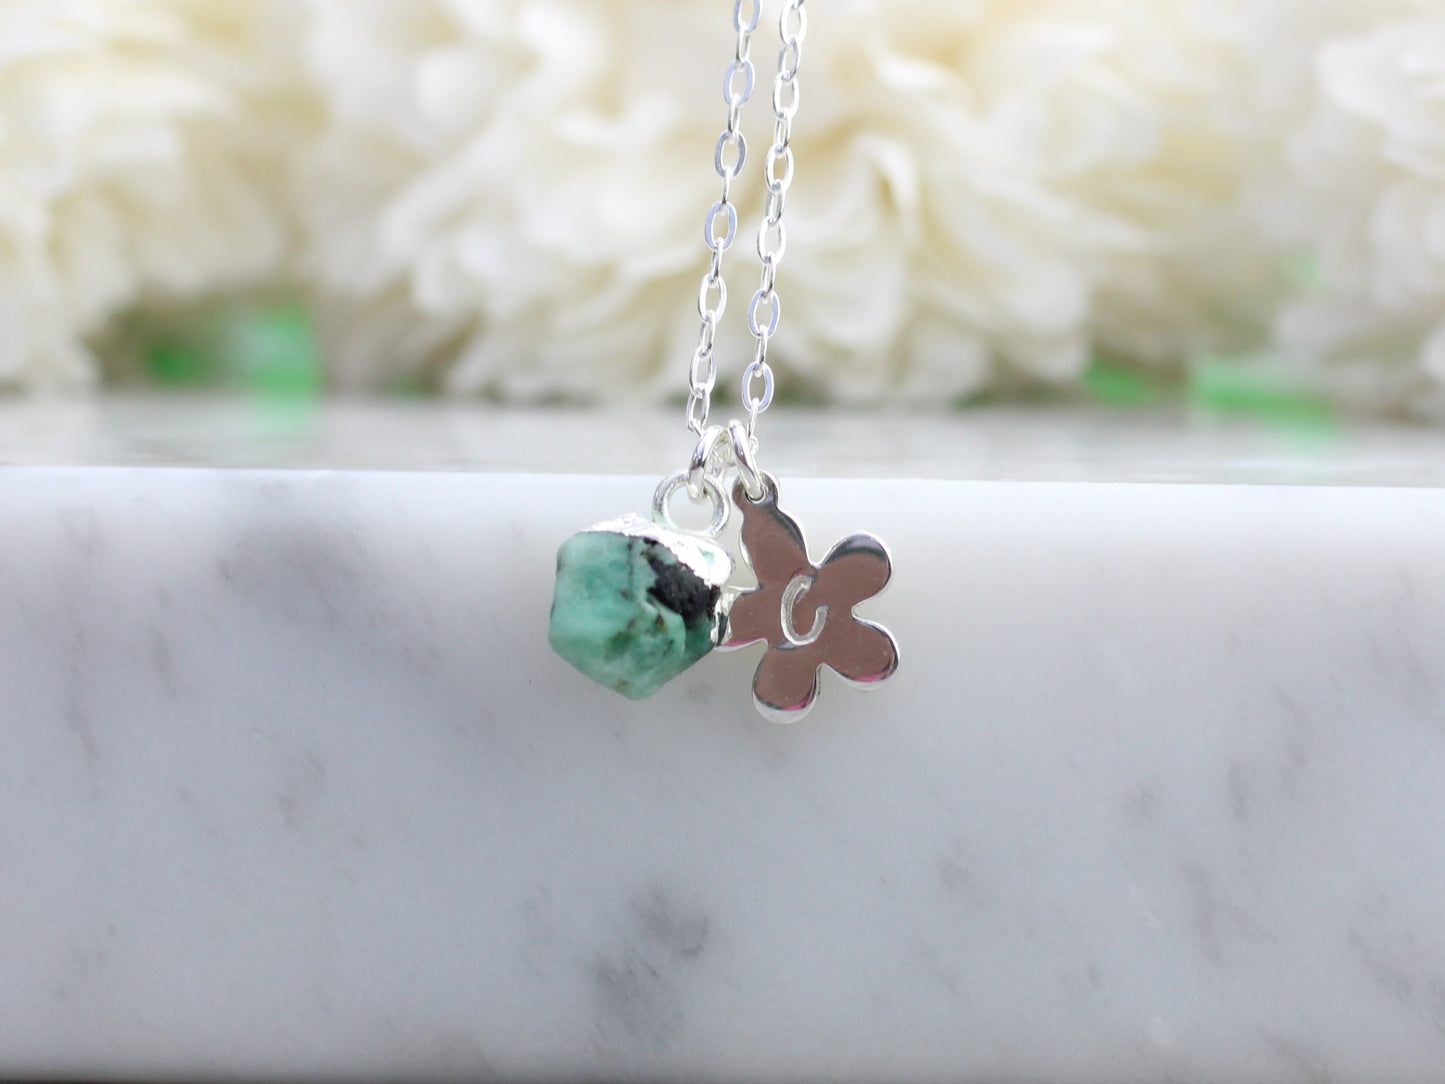 Personalised emerald necklace in silver.